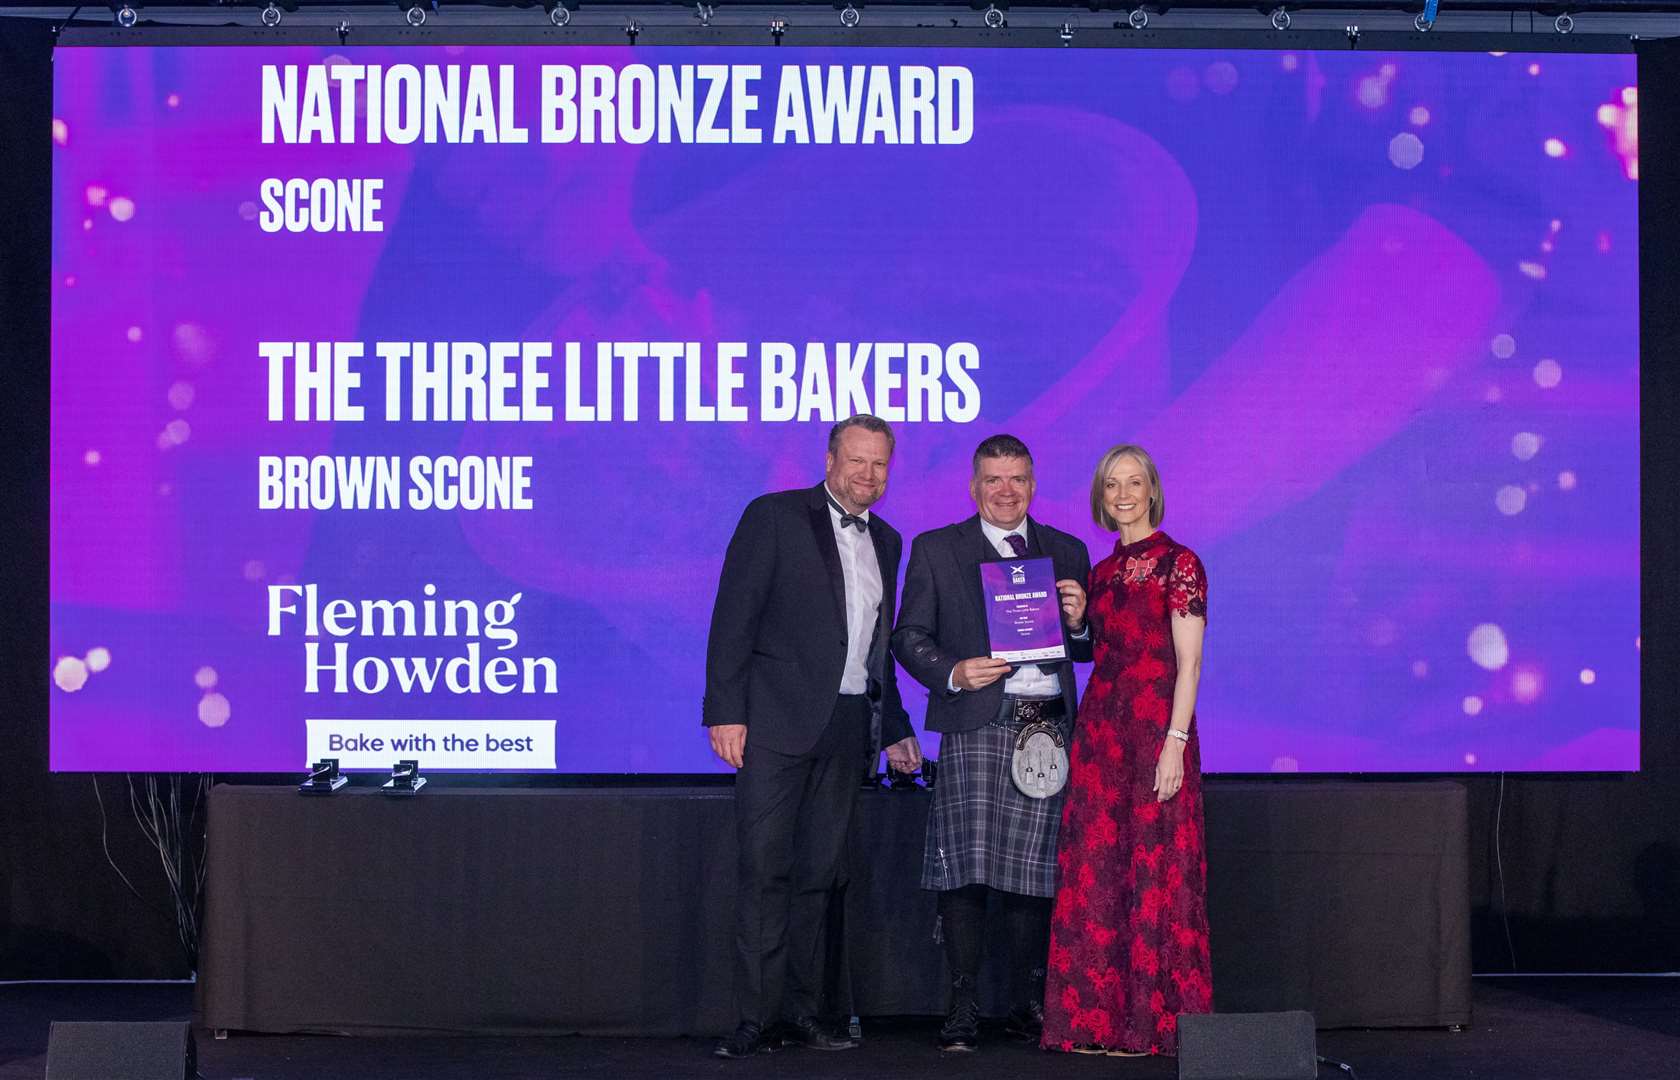 The Three Little Bakers' brown scones won national bronze.